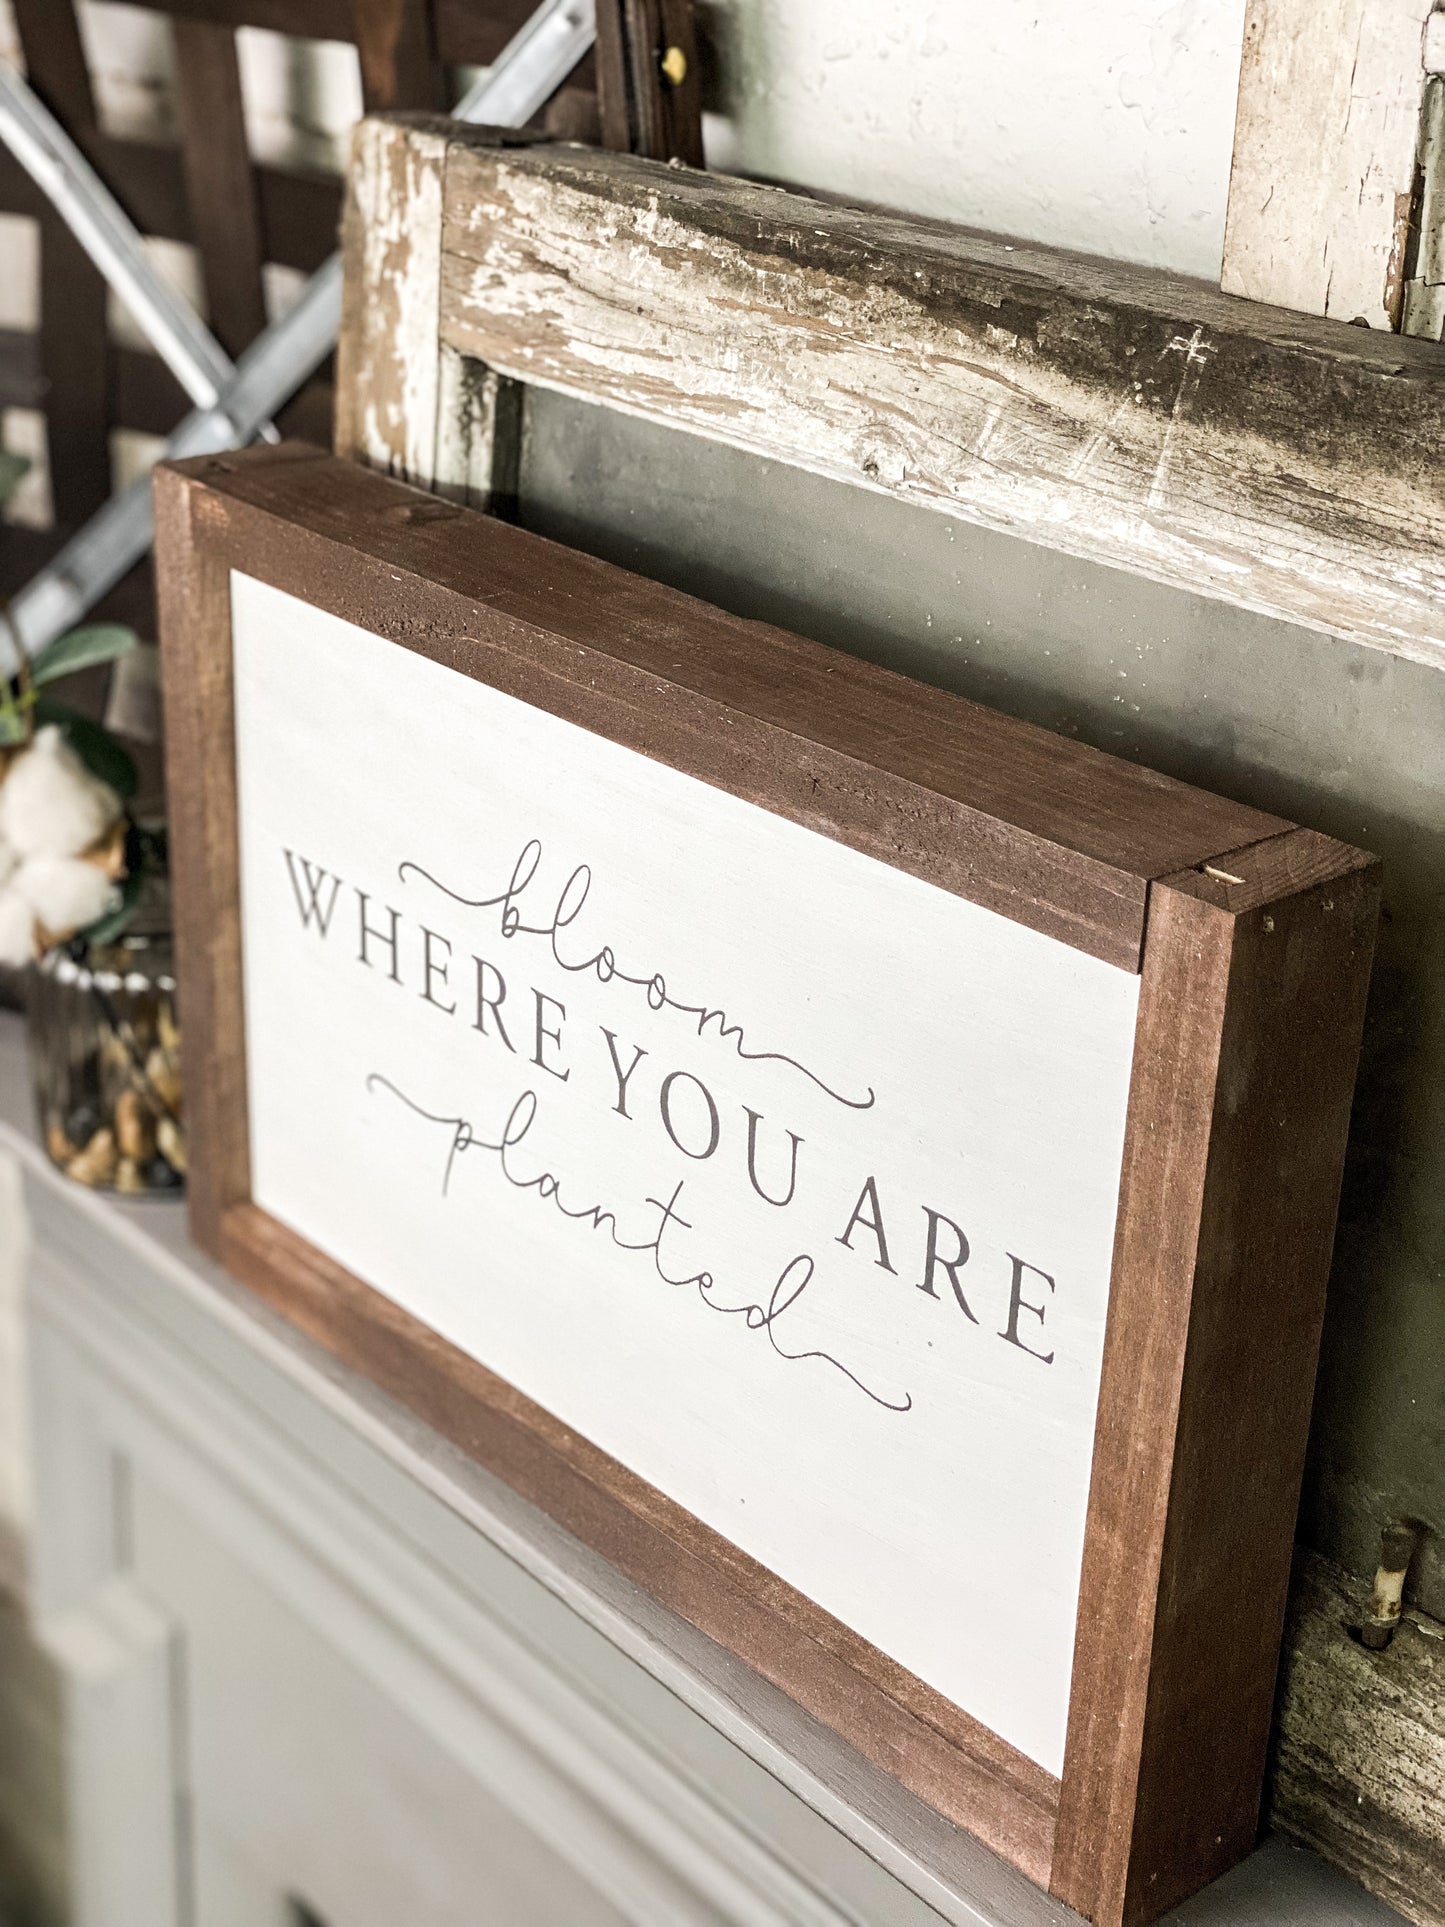 Bloom Where You Are Planted - Framed Wood Sign